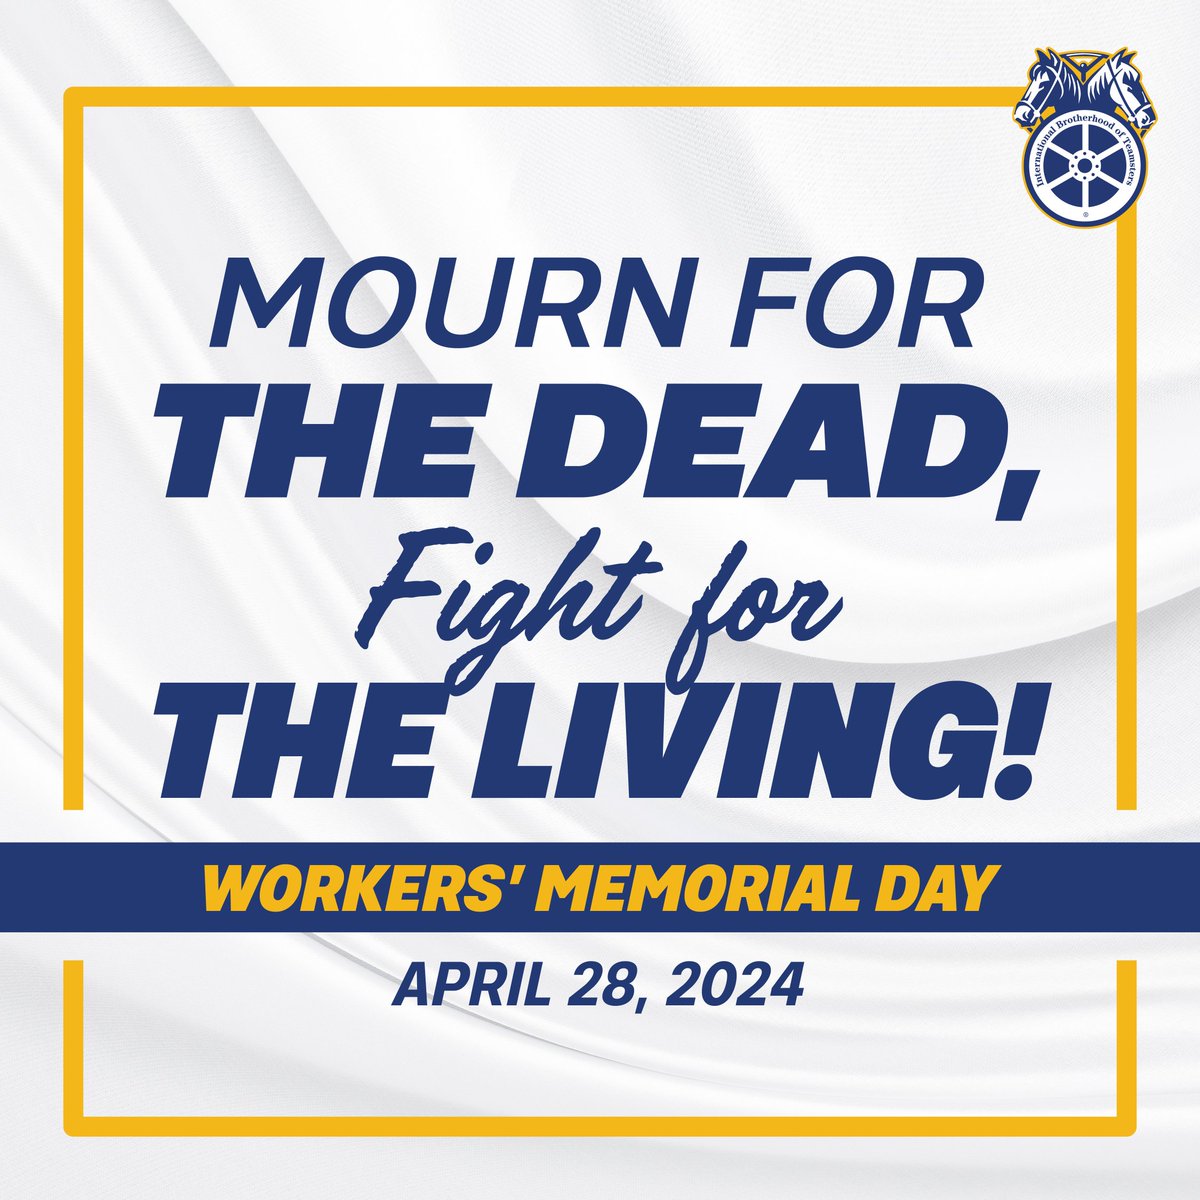 Today, #Teamsters and other trade unionists worldwide honor #WorkersMemorialDay, remembering and taking action on behalf of workers who have died, been injured, made ill, or disabled from their work. Nearly 5,500 workers were killed on the job in 2022, according to the latest